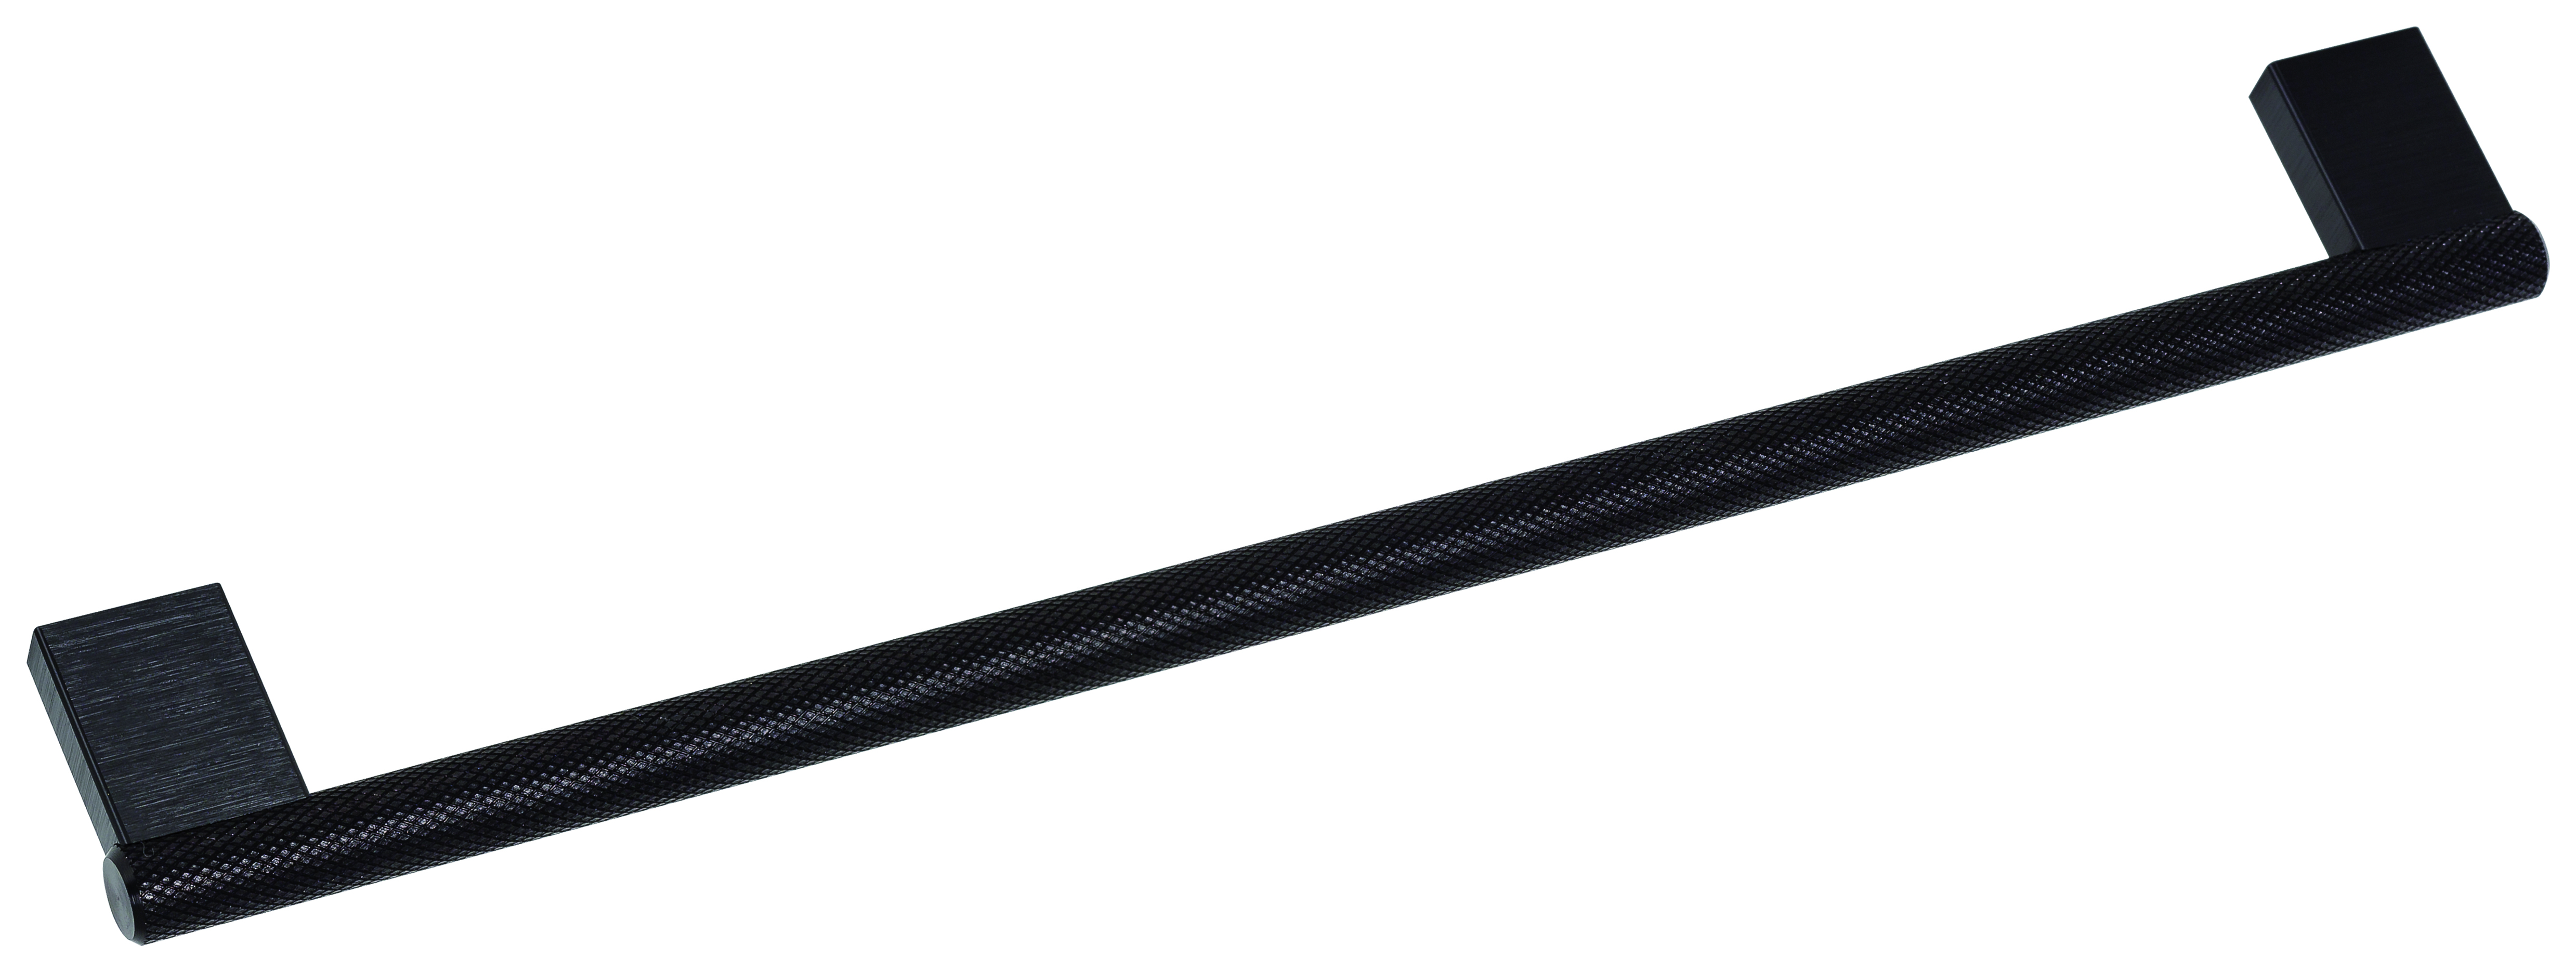 Image of Wickes Dalston Handle - Black 256mm